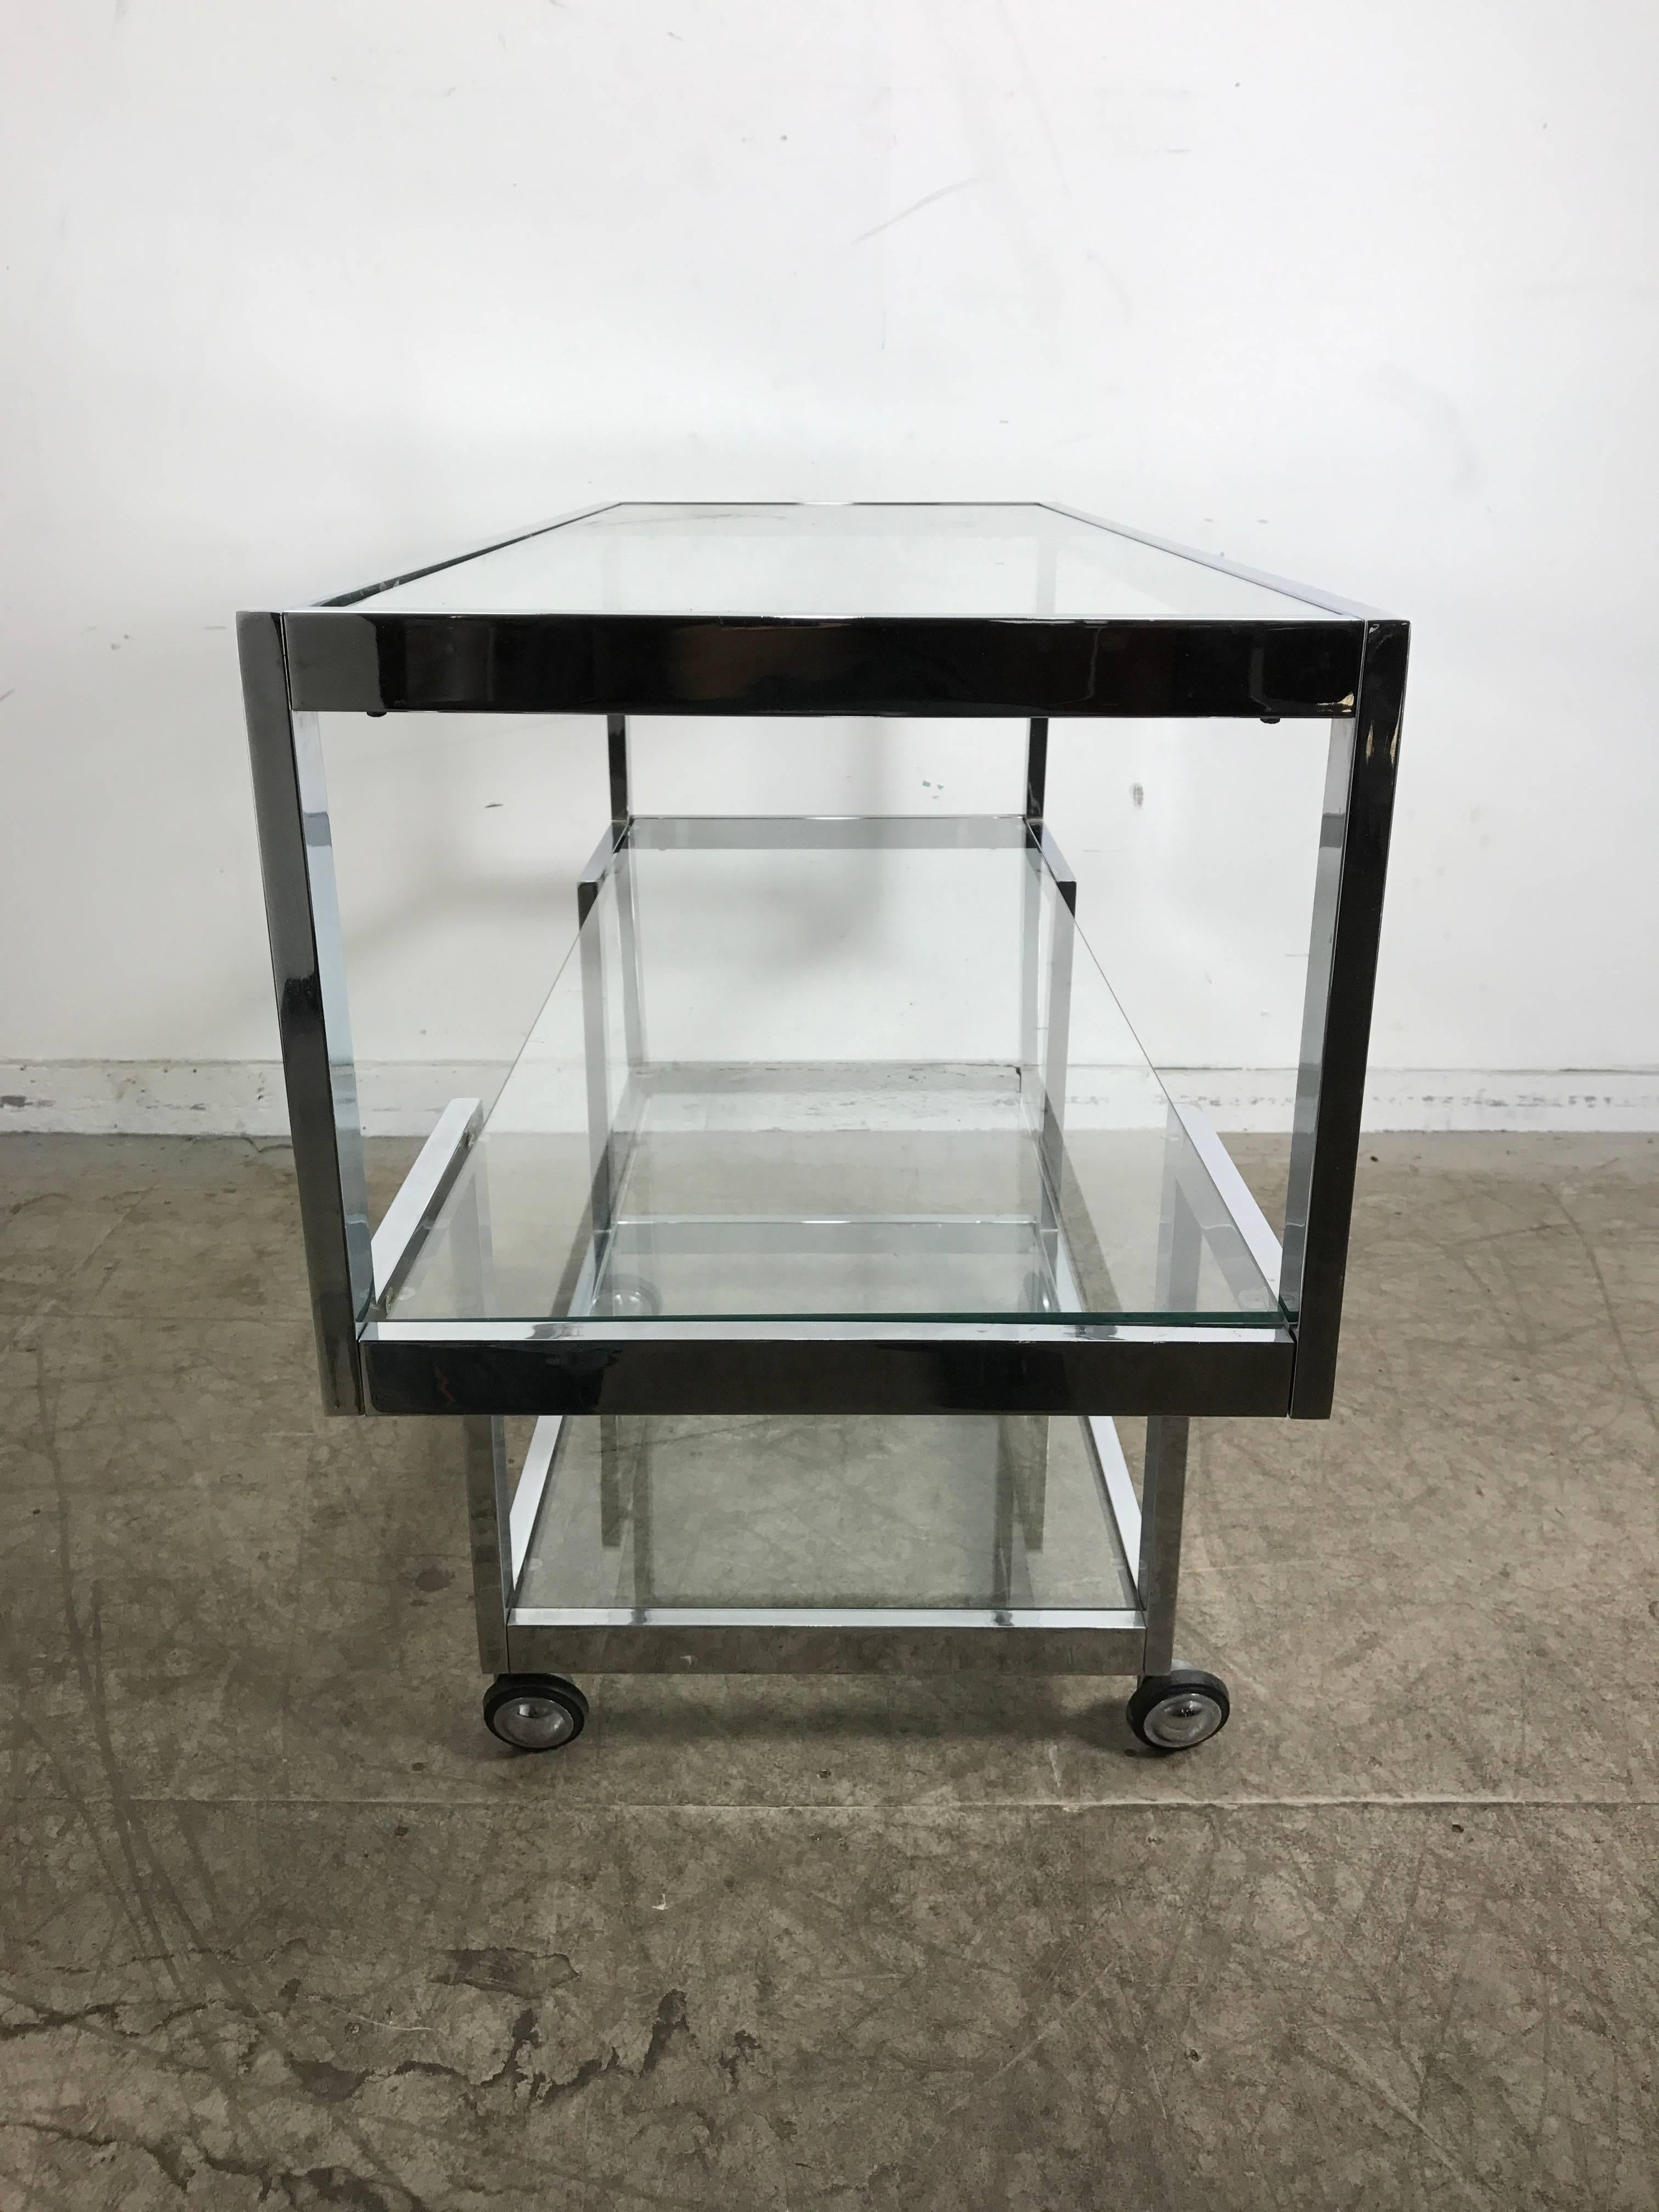 1970s chrome and glass bar cart/ server, handsome architectural design, would also make a stunning console table, designed by Milo Baughman, hand delivery avail to New York City or anywhere en route from Buffalo New York.